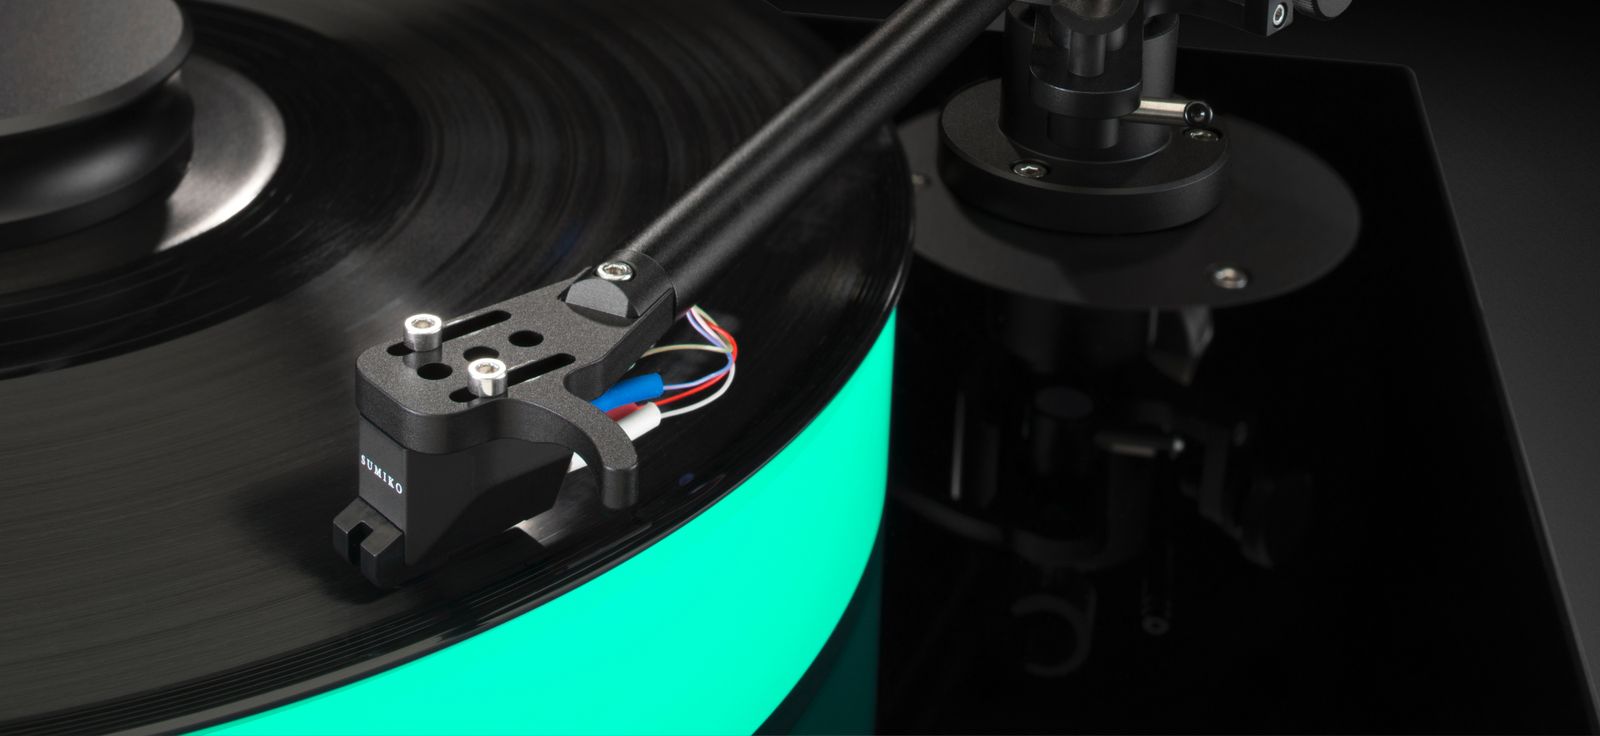 The McIntosh MT5 Precision Turntable now comes with a Sumiko Amethyst